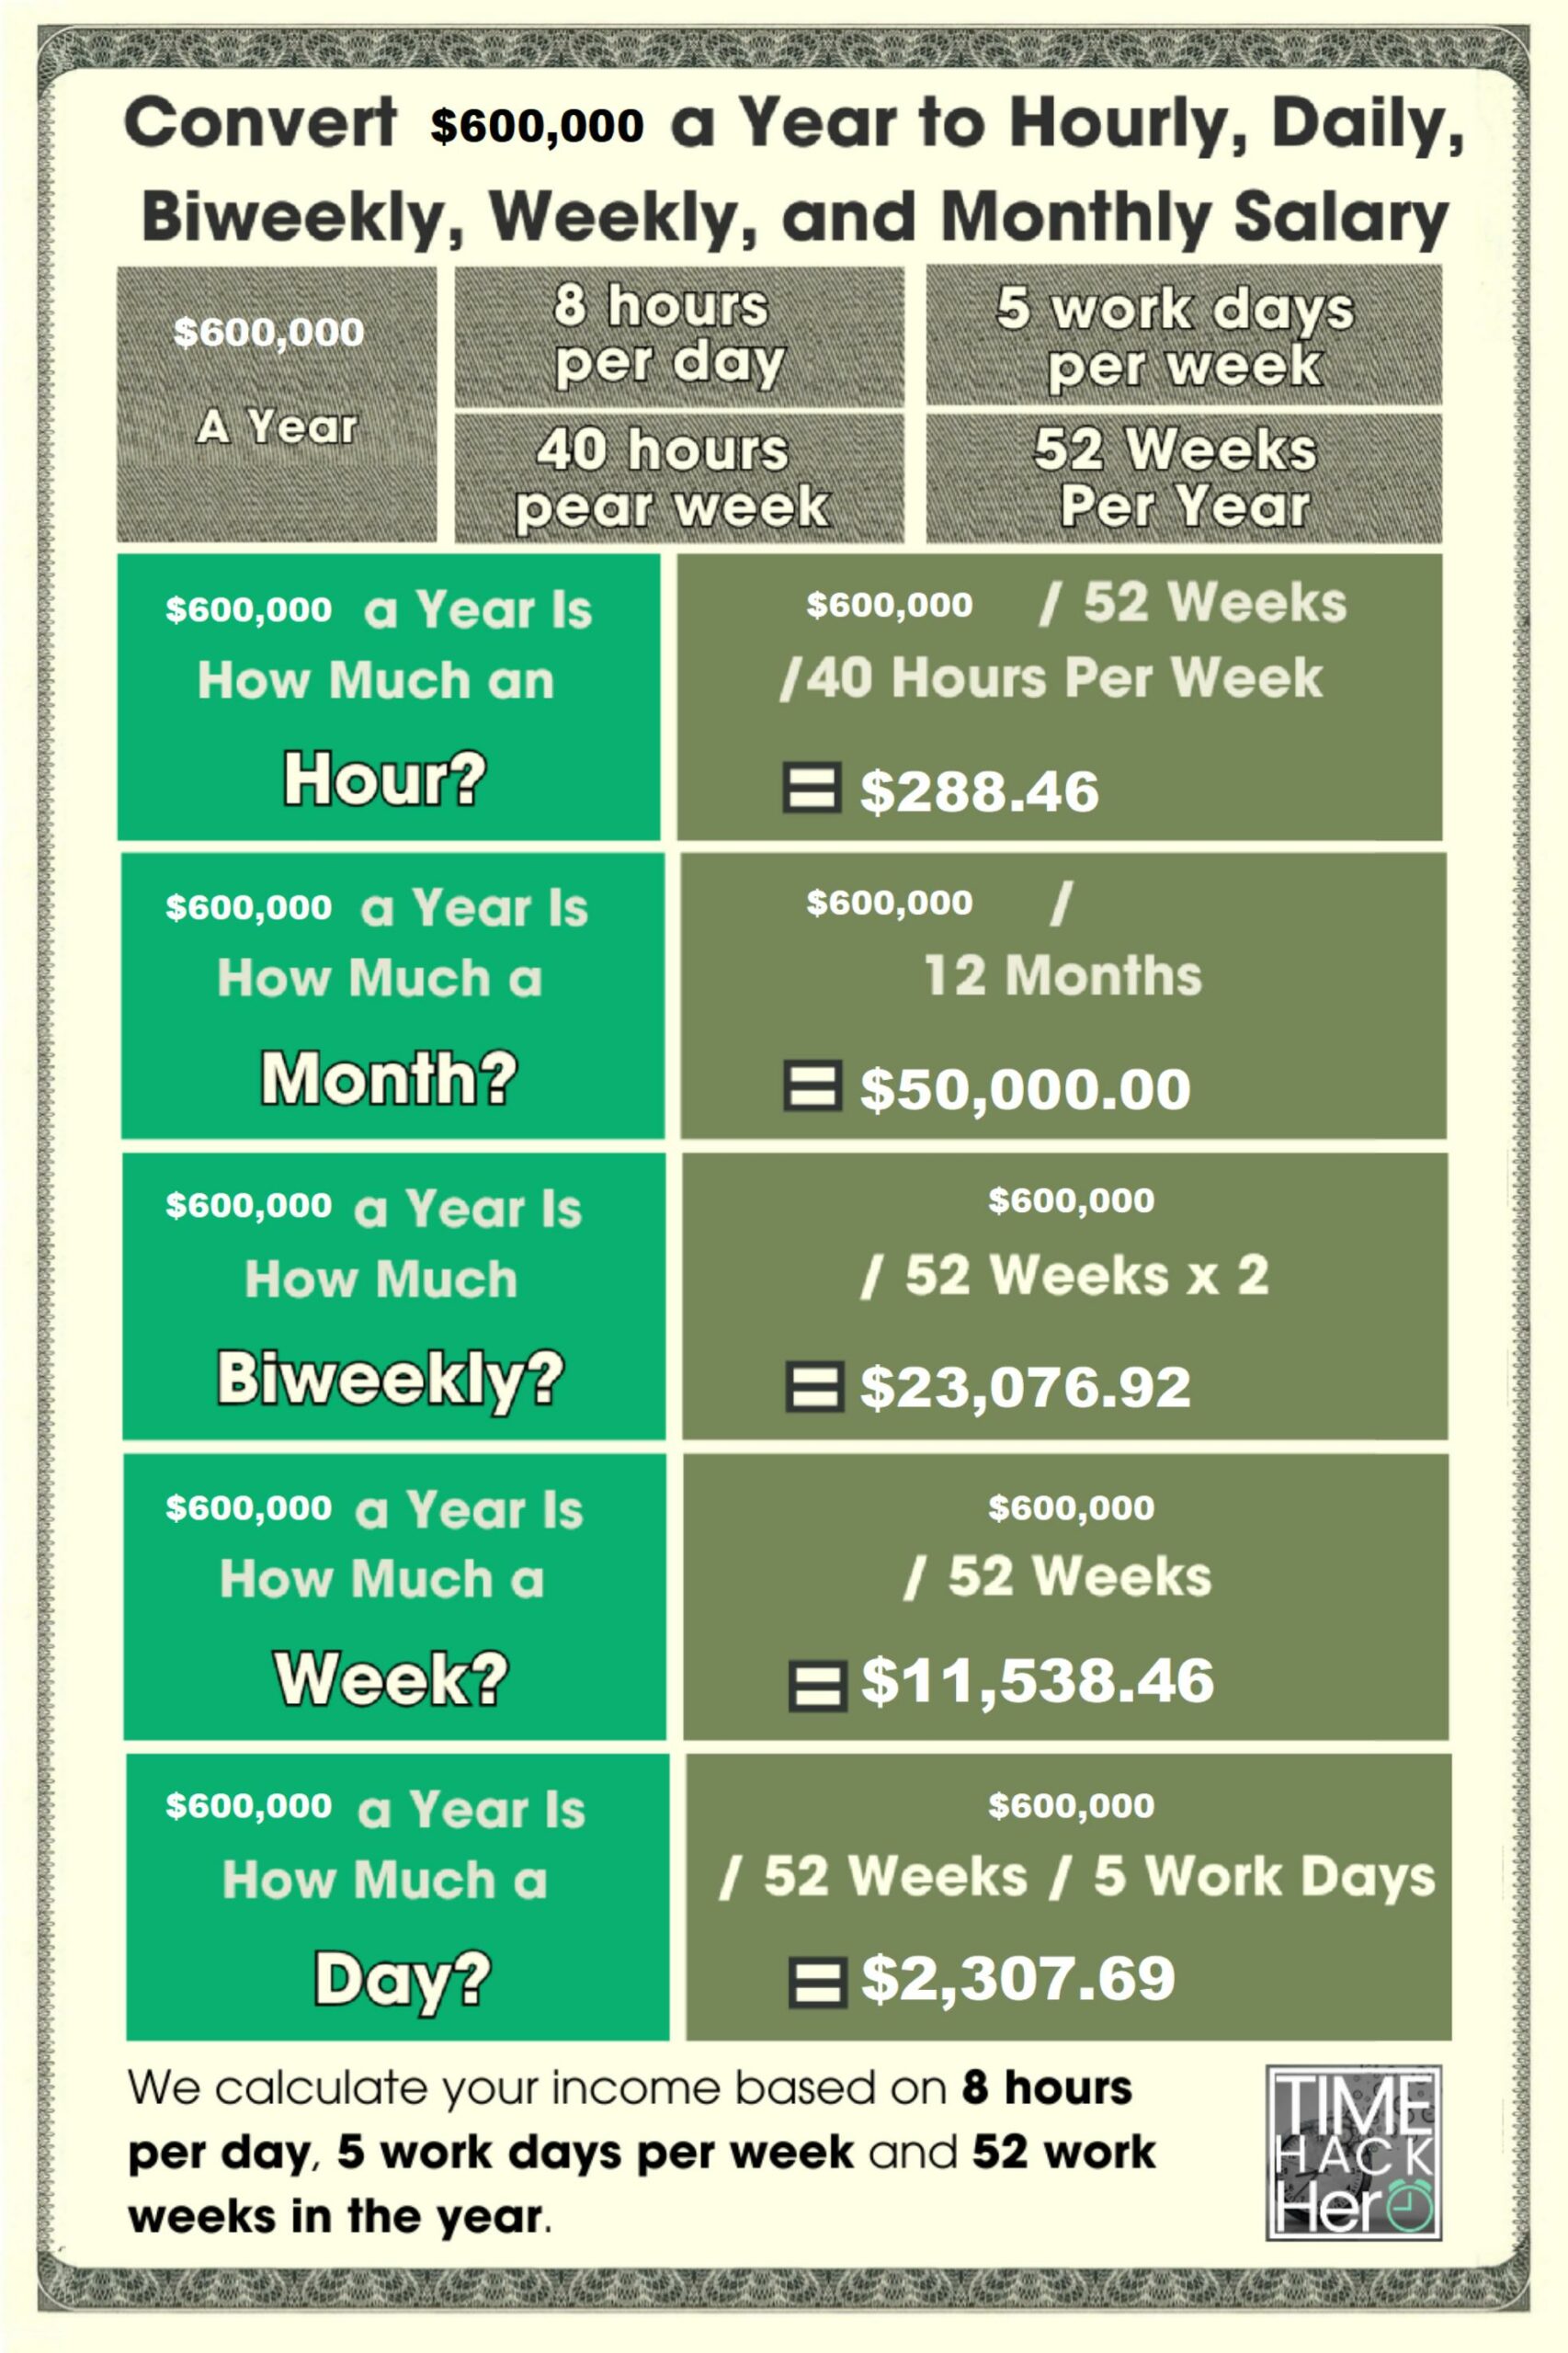 Convert $600000 a Year to Hourly, Daily, Biweekly, Weekly, and Monthly Salary